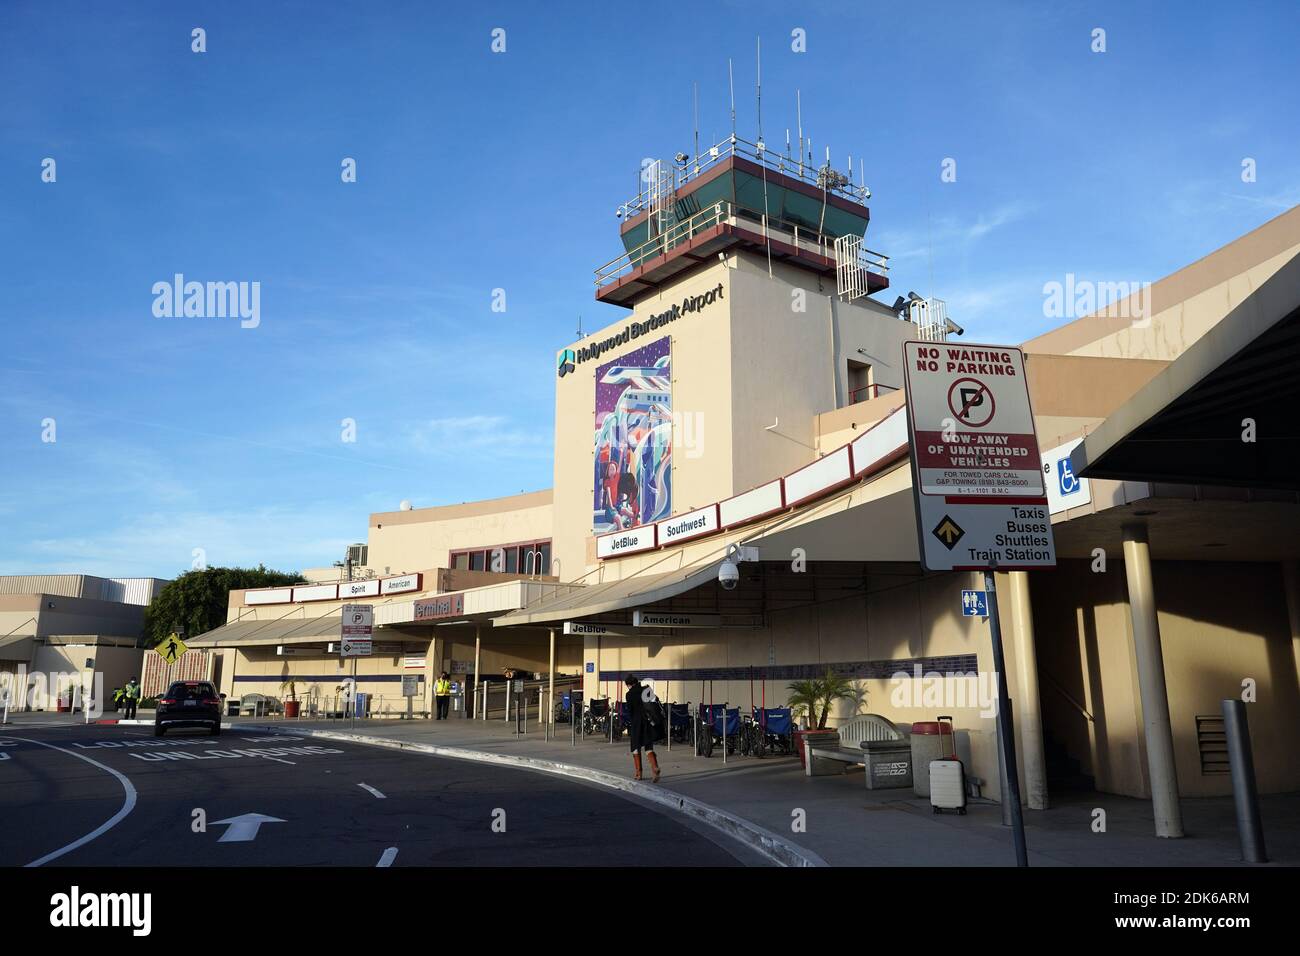 The Hollywood Burbank Airport (BUR) amid the global coronavirus COVID-19 pandemic, Sunday, Dec. 13, 2020, in Burbank, Calif. The airport, owned by the Stock Photo